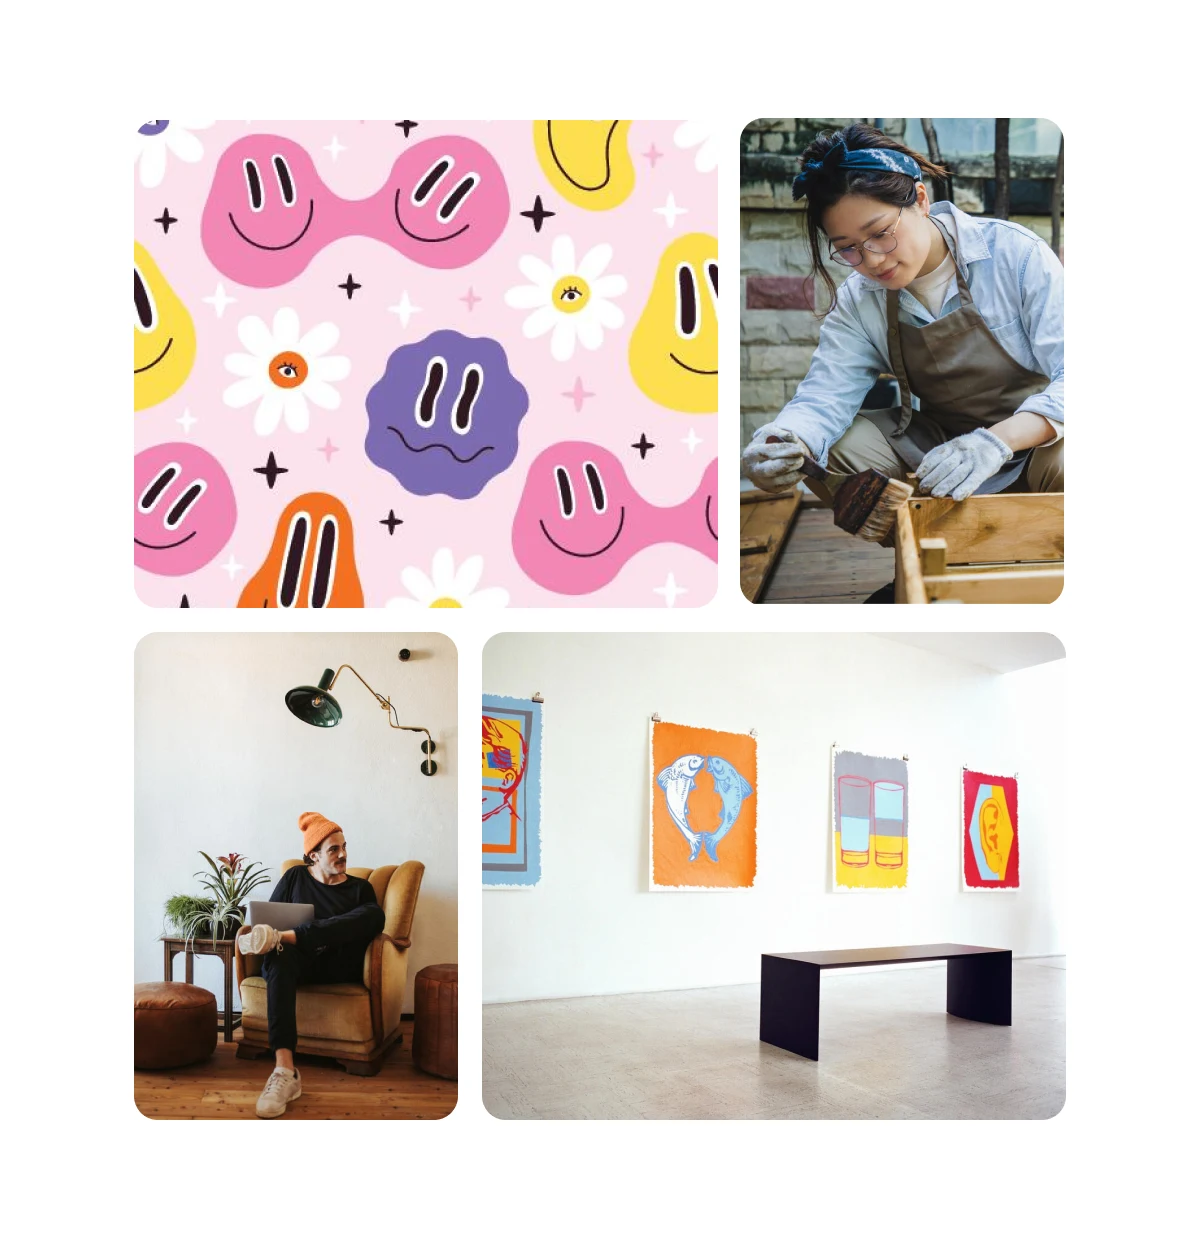 Four Pin grid. Psychedelic wallpapers. Woman painting wood. Man sitting with laptop. Museum with bright framed art.